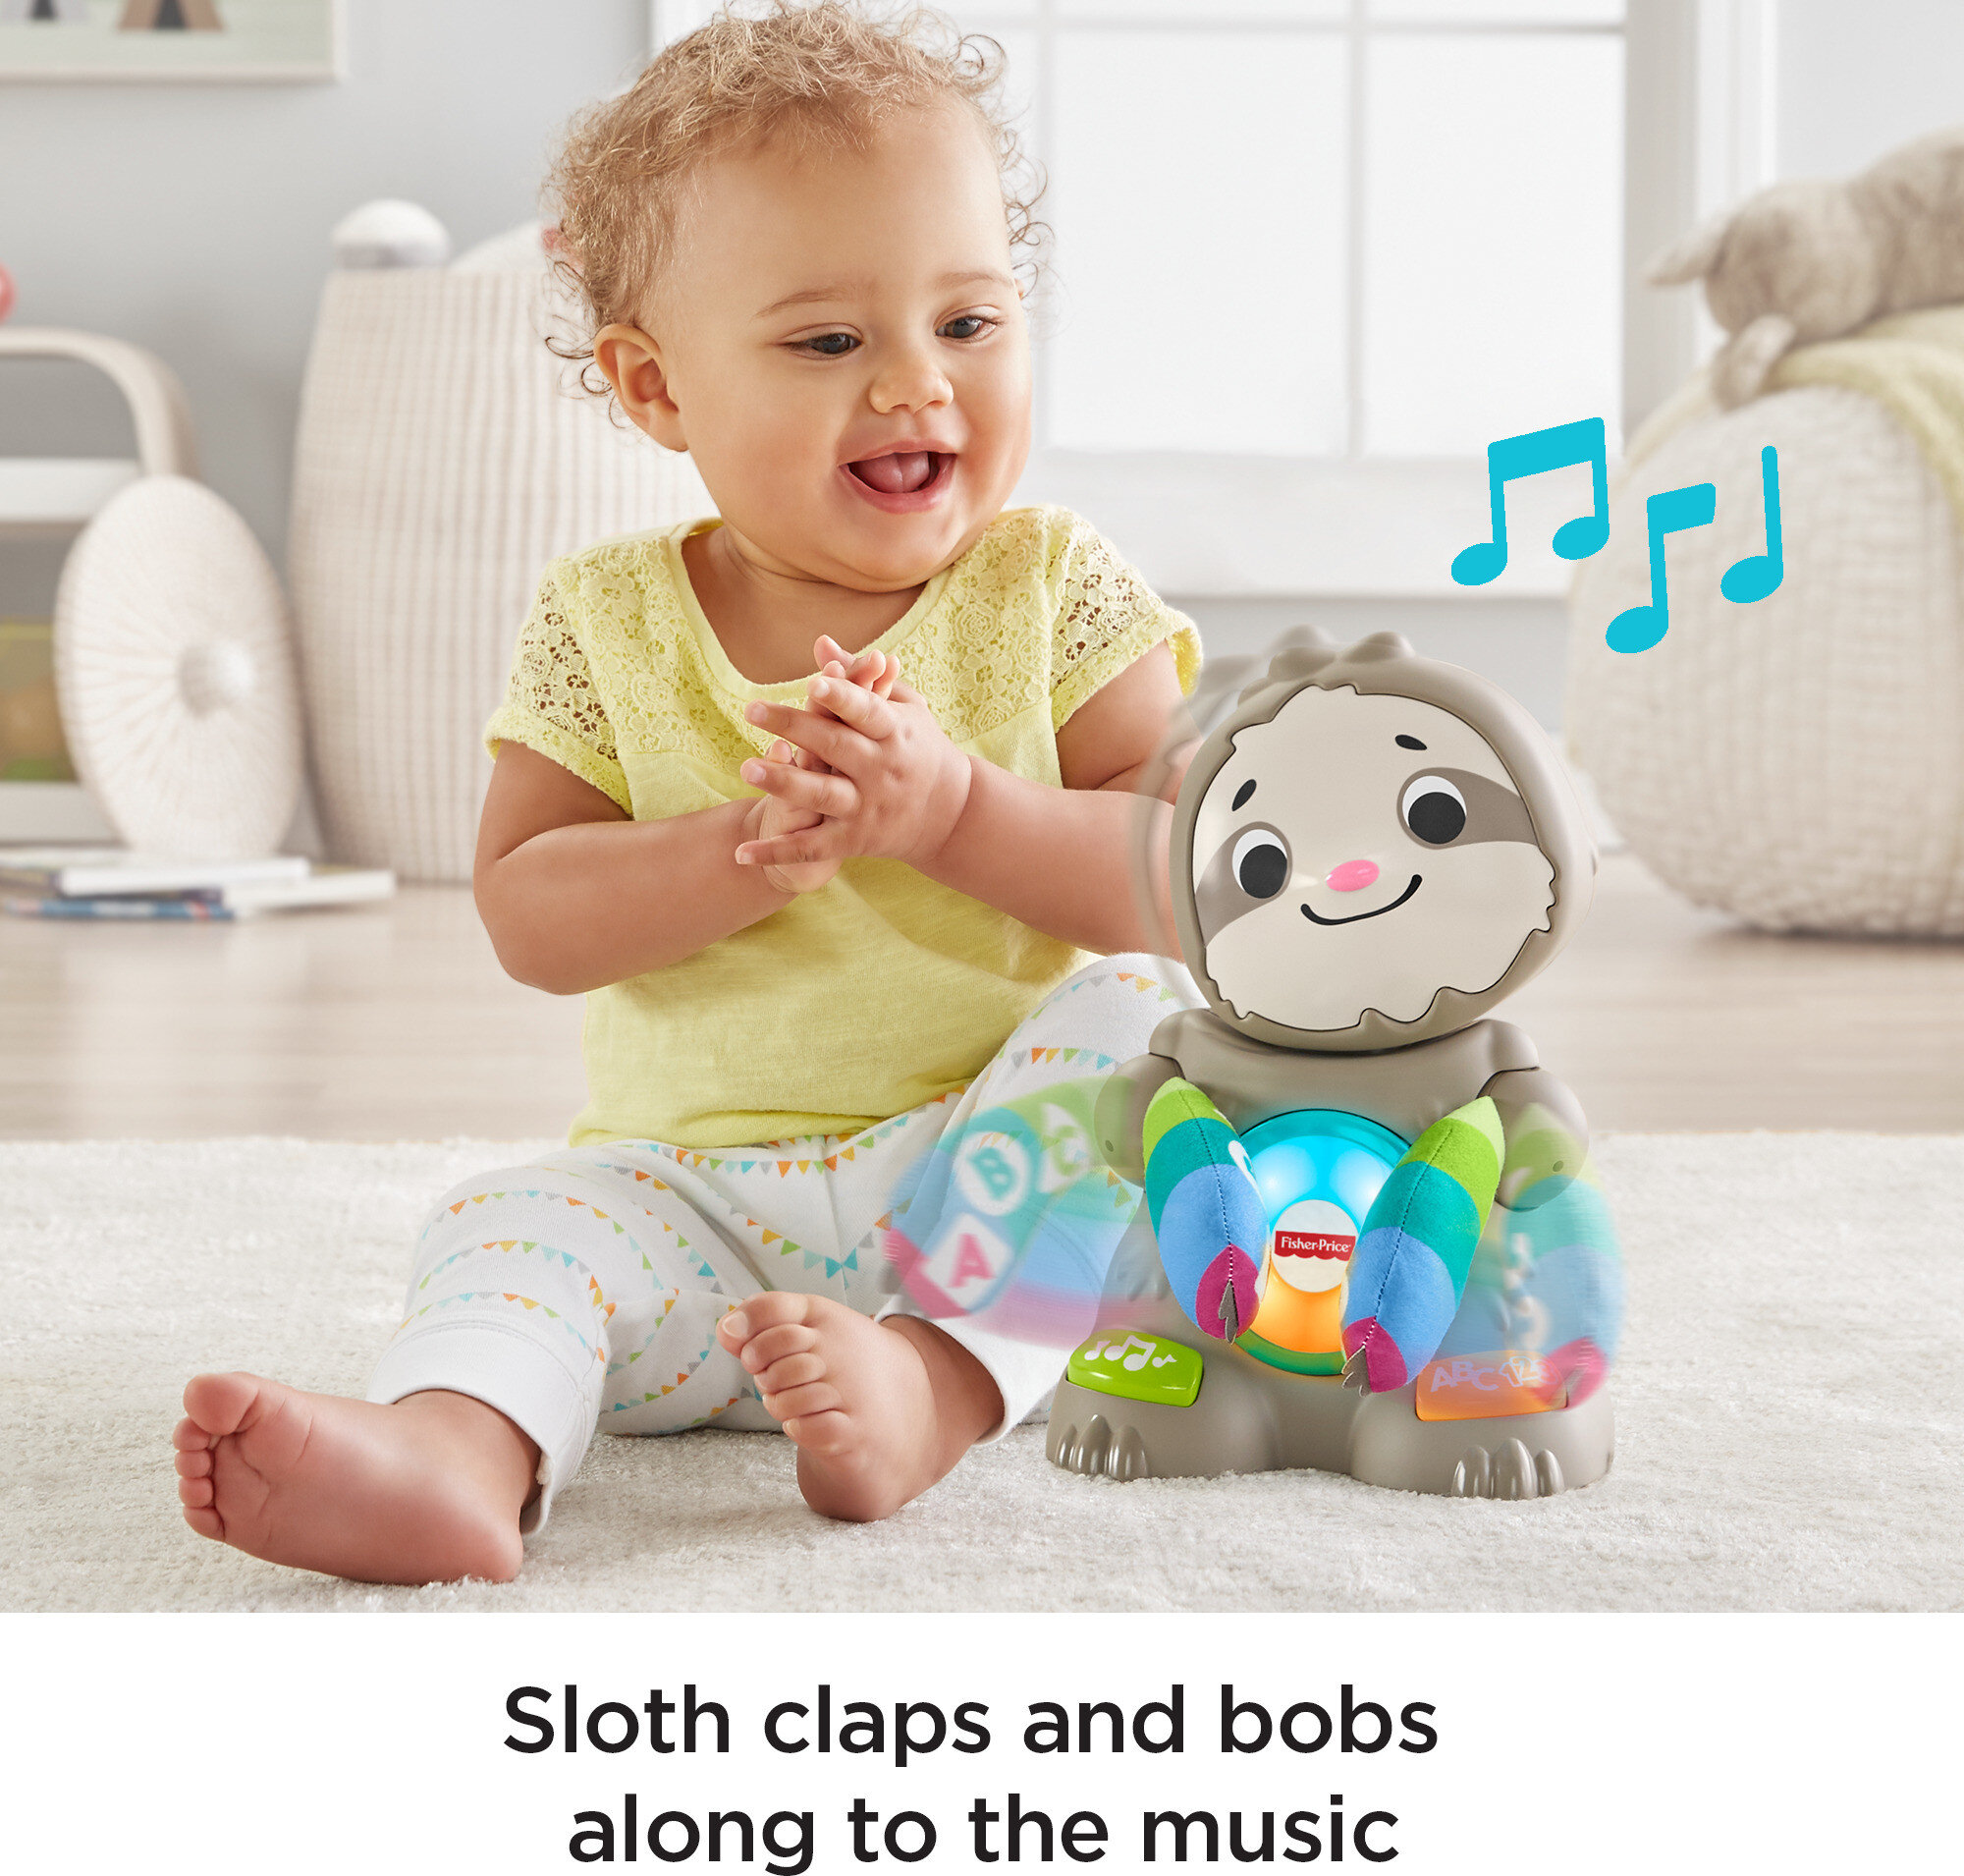 Fisher-Price Linkimals Smooth Moves Sloth Baby Electronic Learning Toy with Lights & Music - image 5 of 7